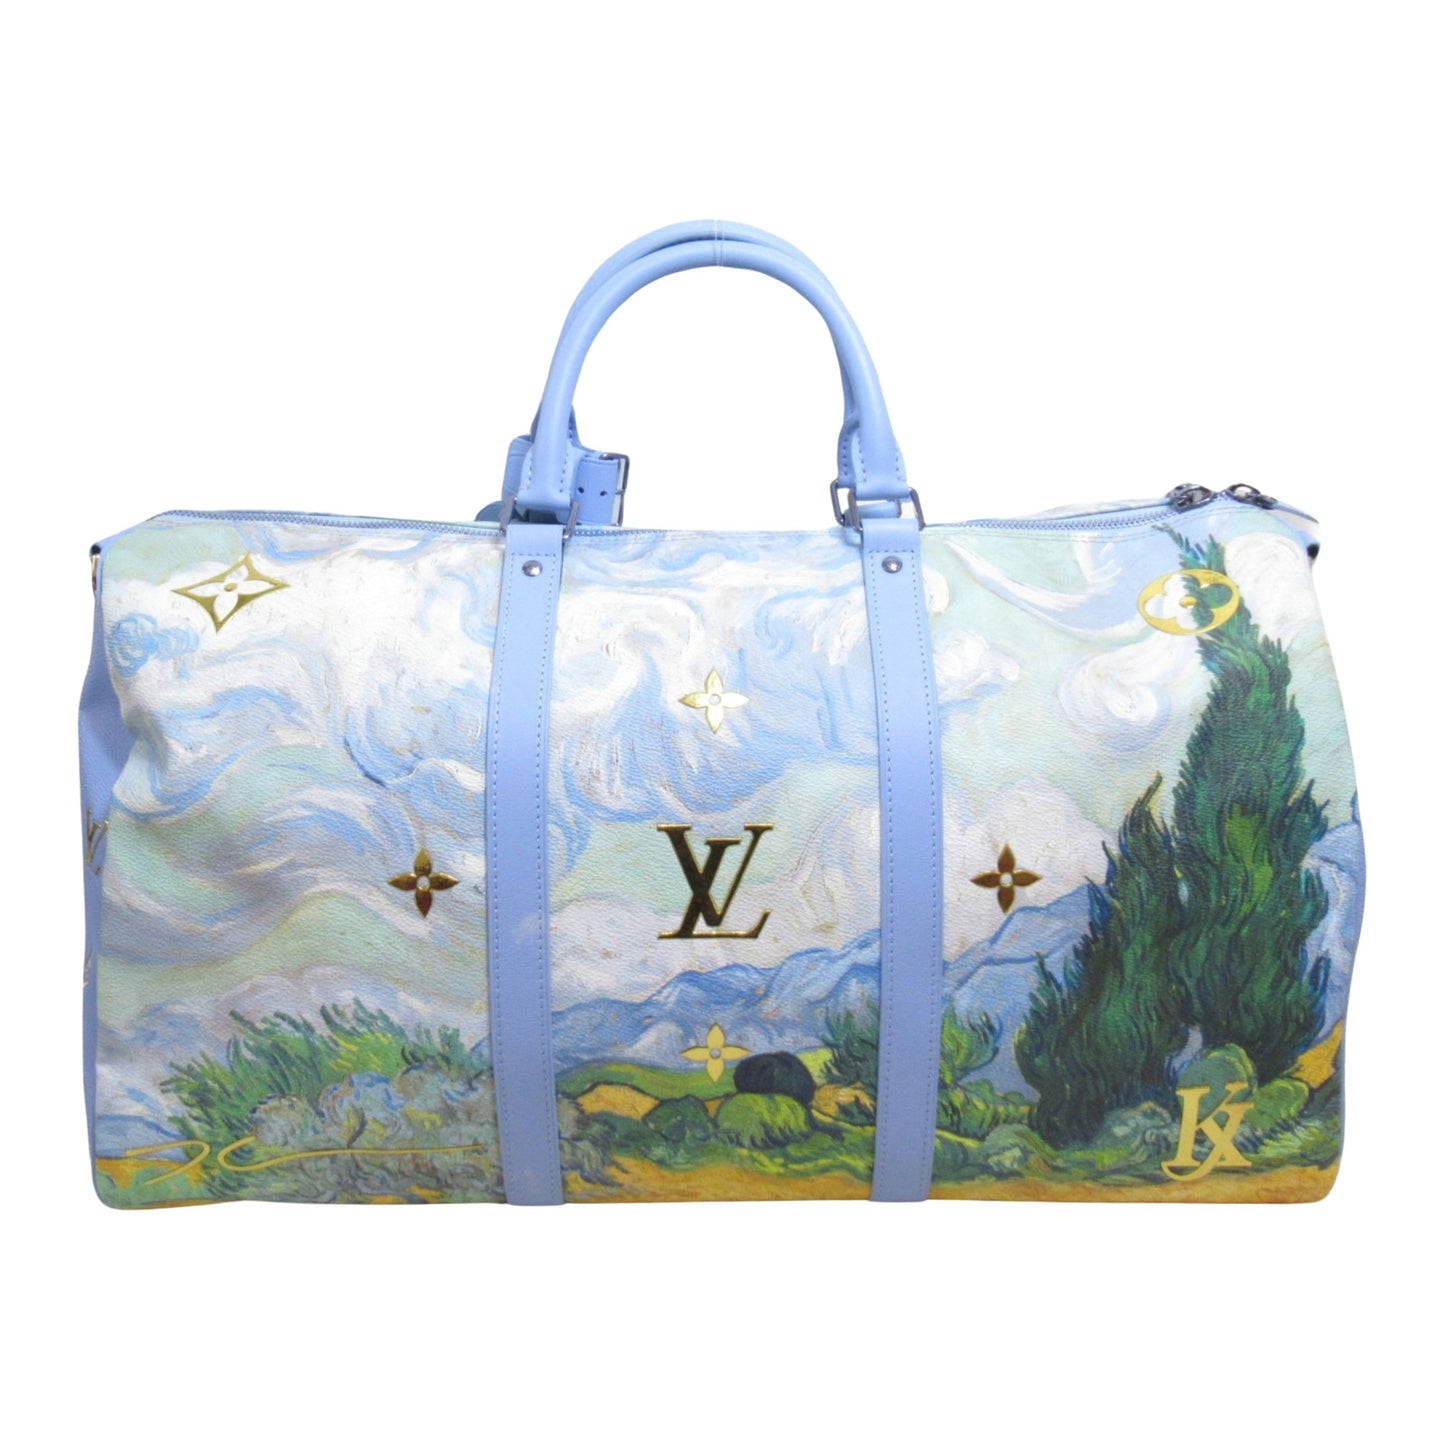 Louis Vuitton Unisex Premium Blue Canvas Boston Bag for Travel or Everyday Use - Excellent Condition in Blue